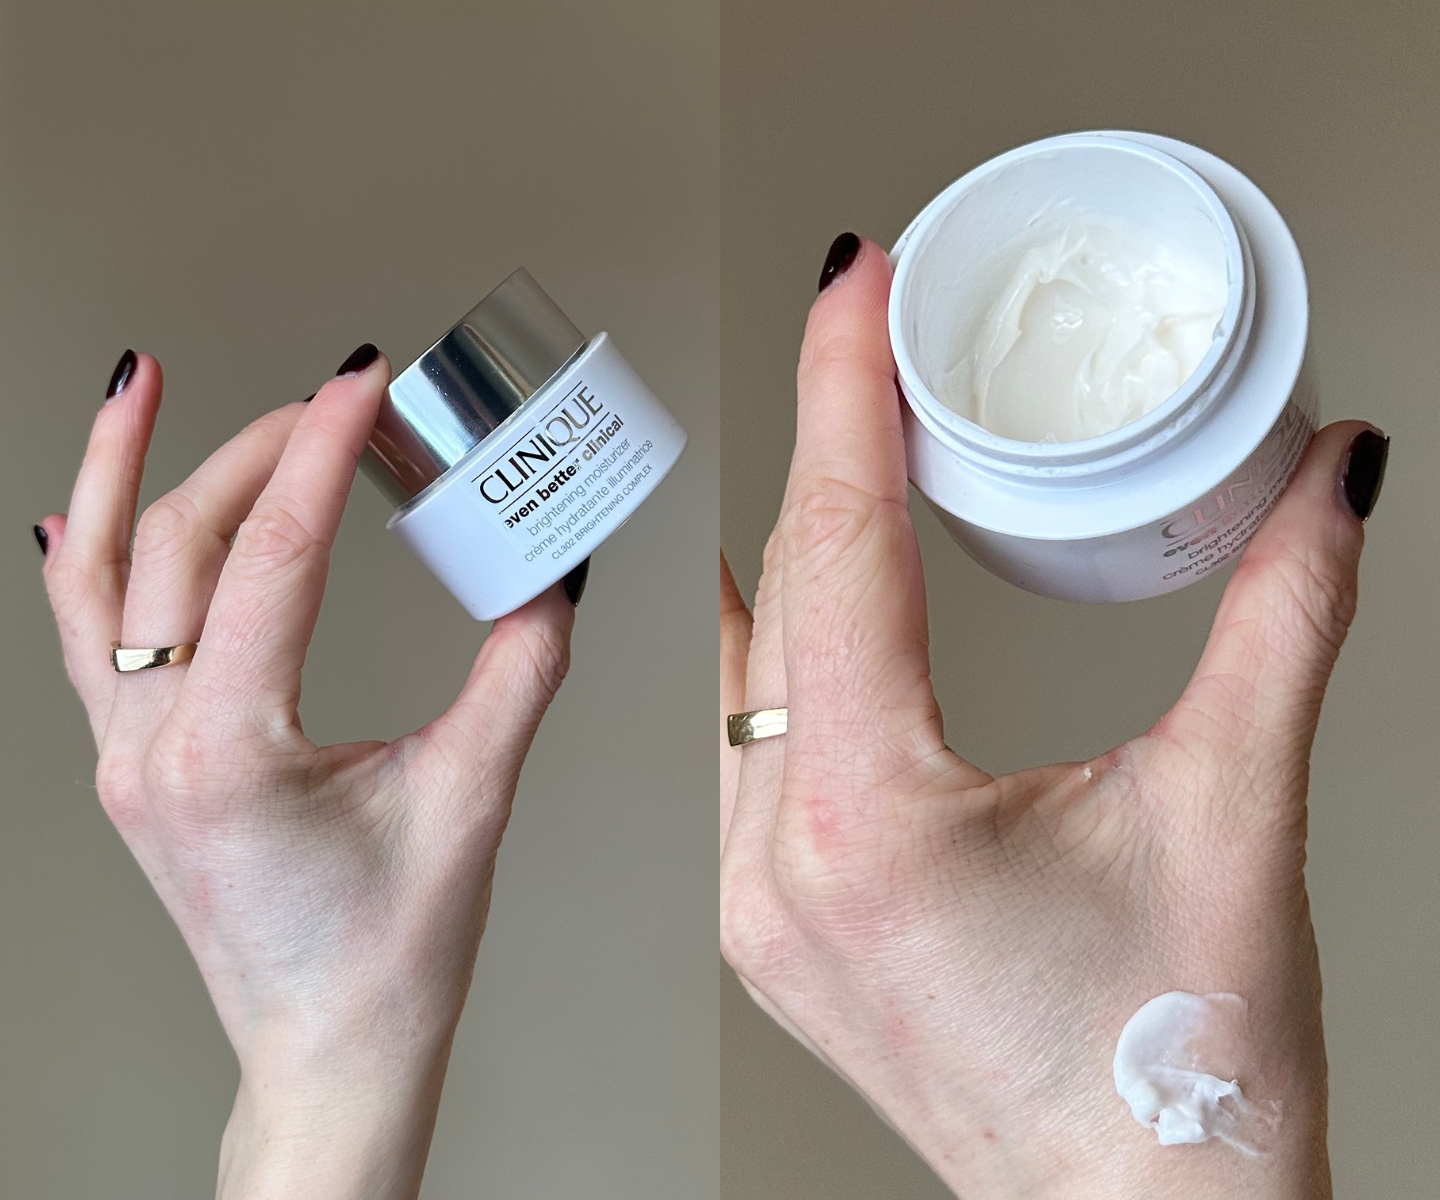 Clinique Even Better Clinical Brightening Moisturizer in-article